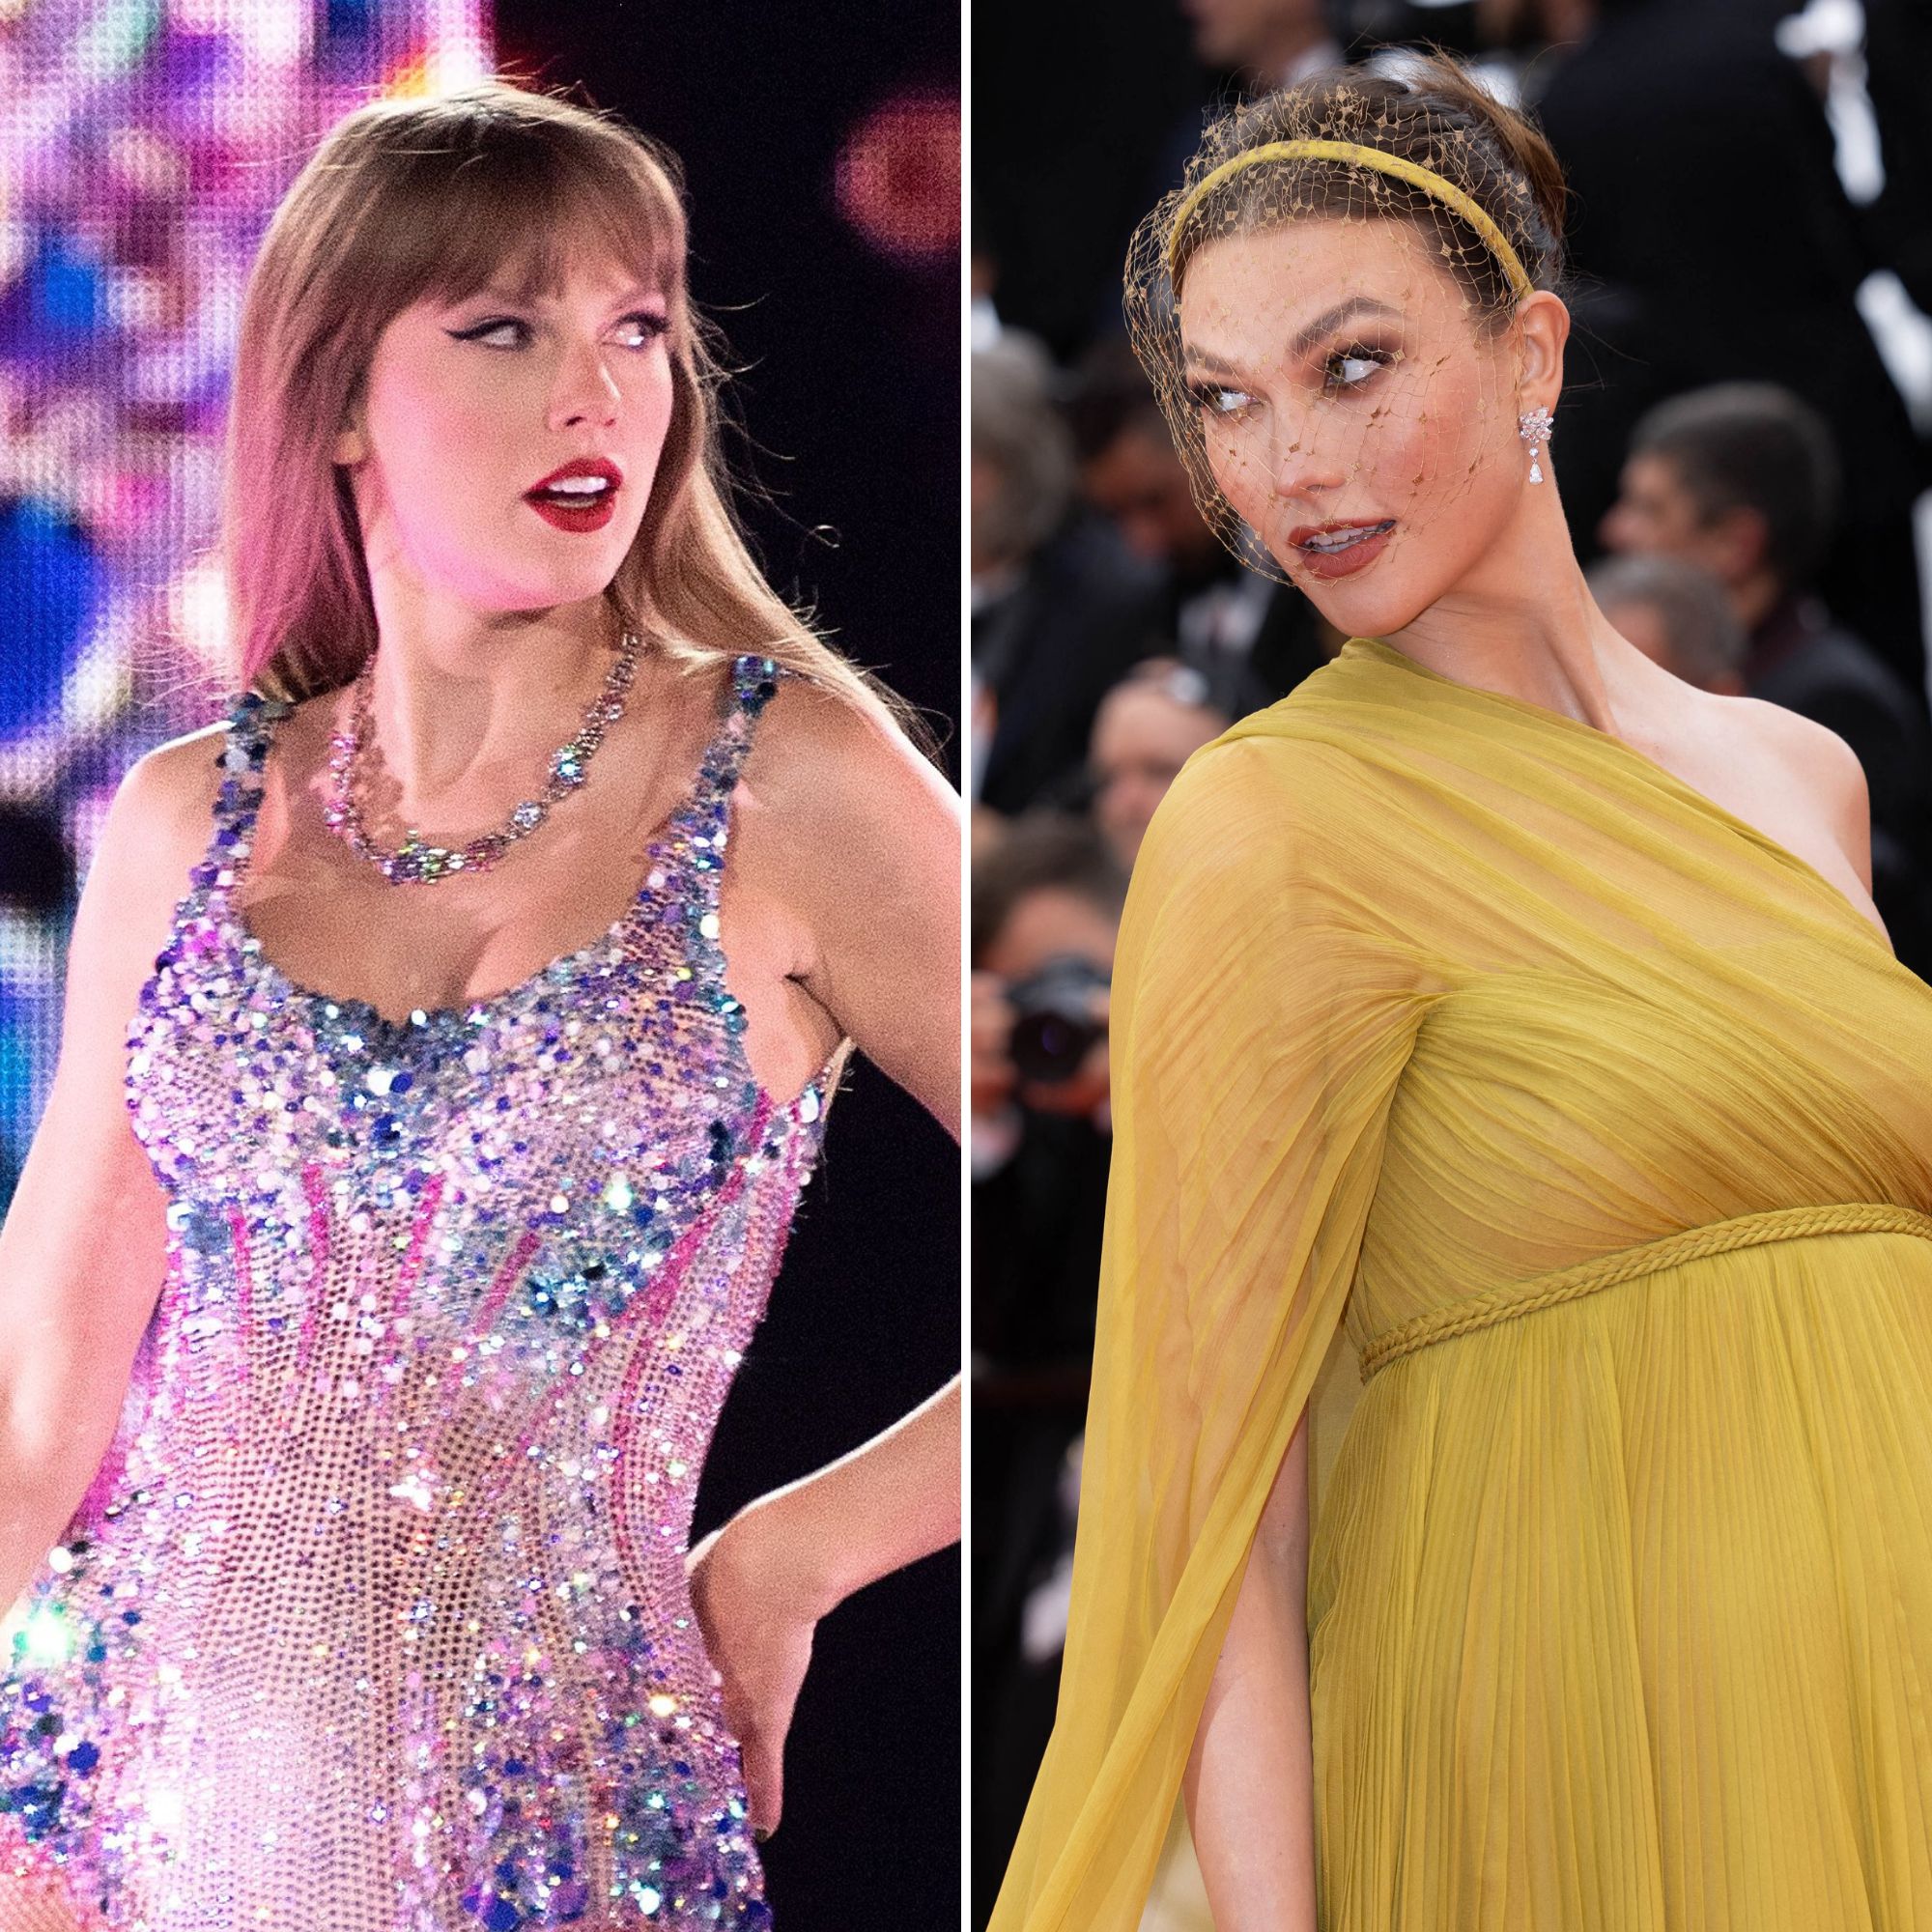 What Happened With Taylor Swift and Karlie Kloss? Rumored Fallout